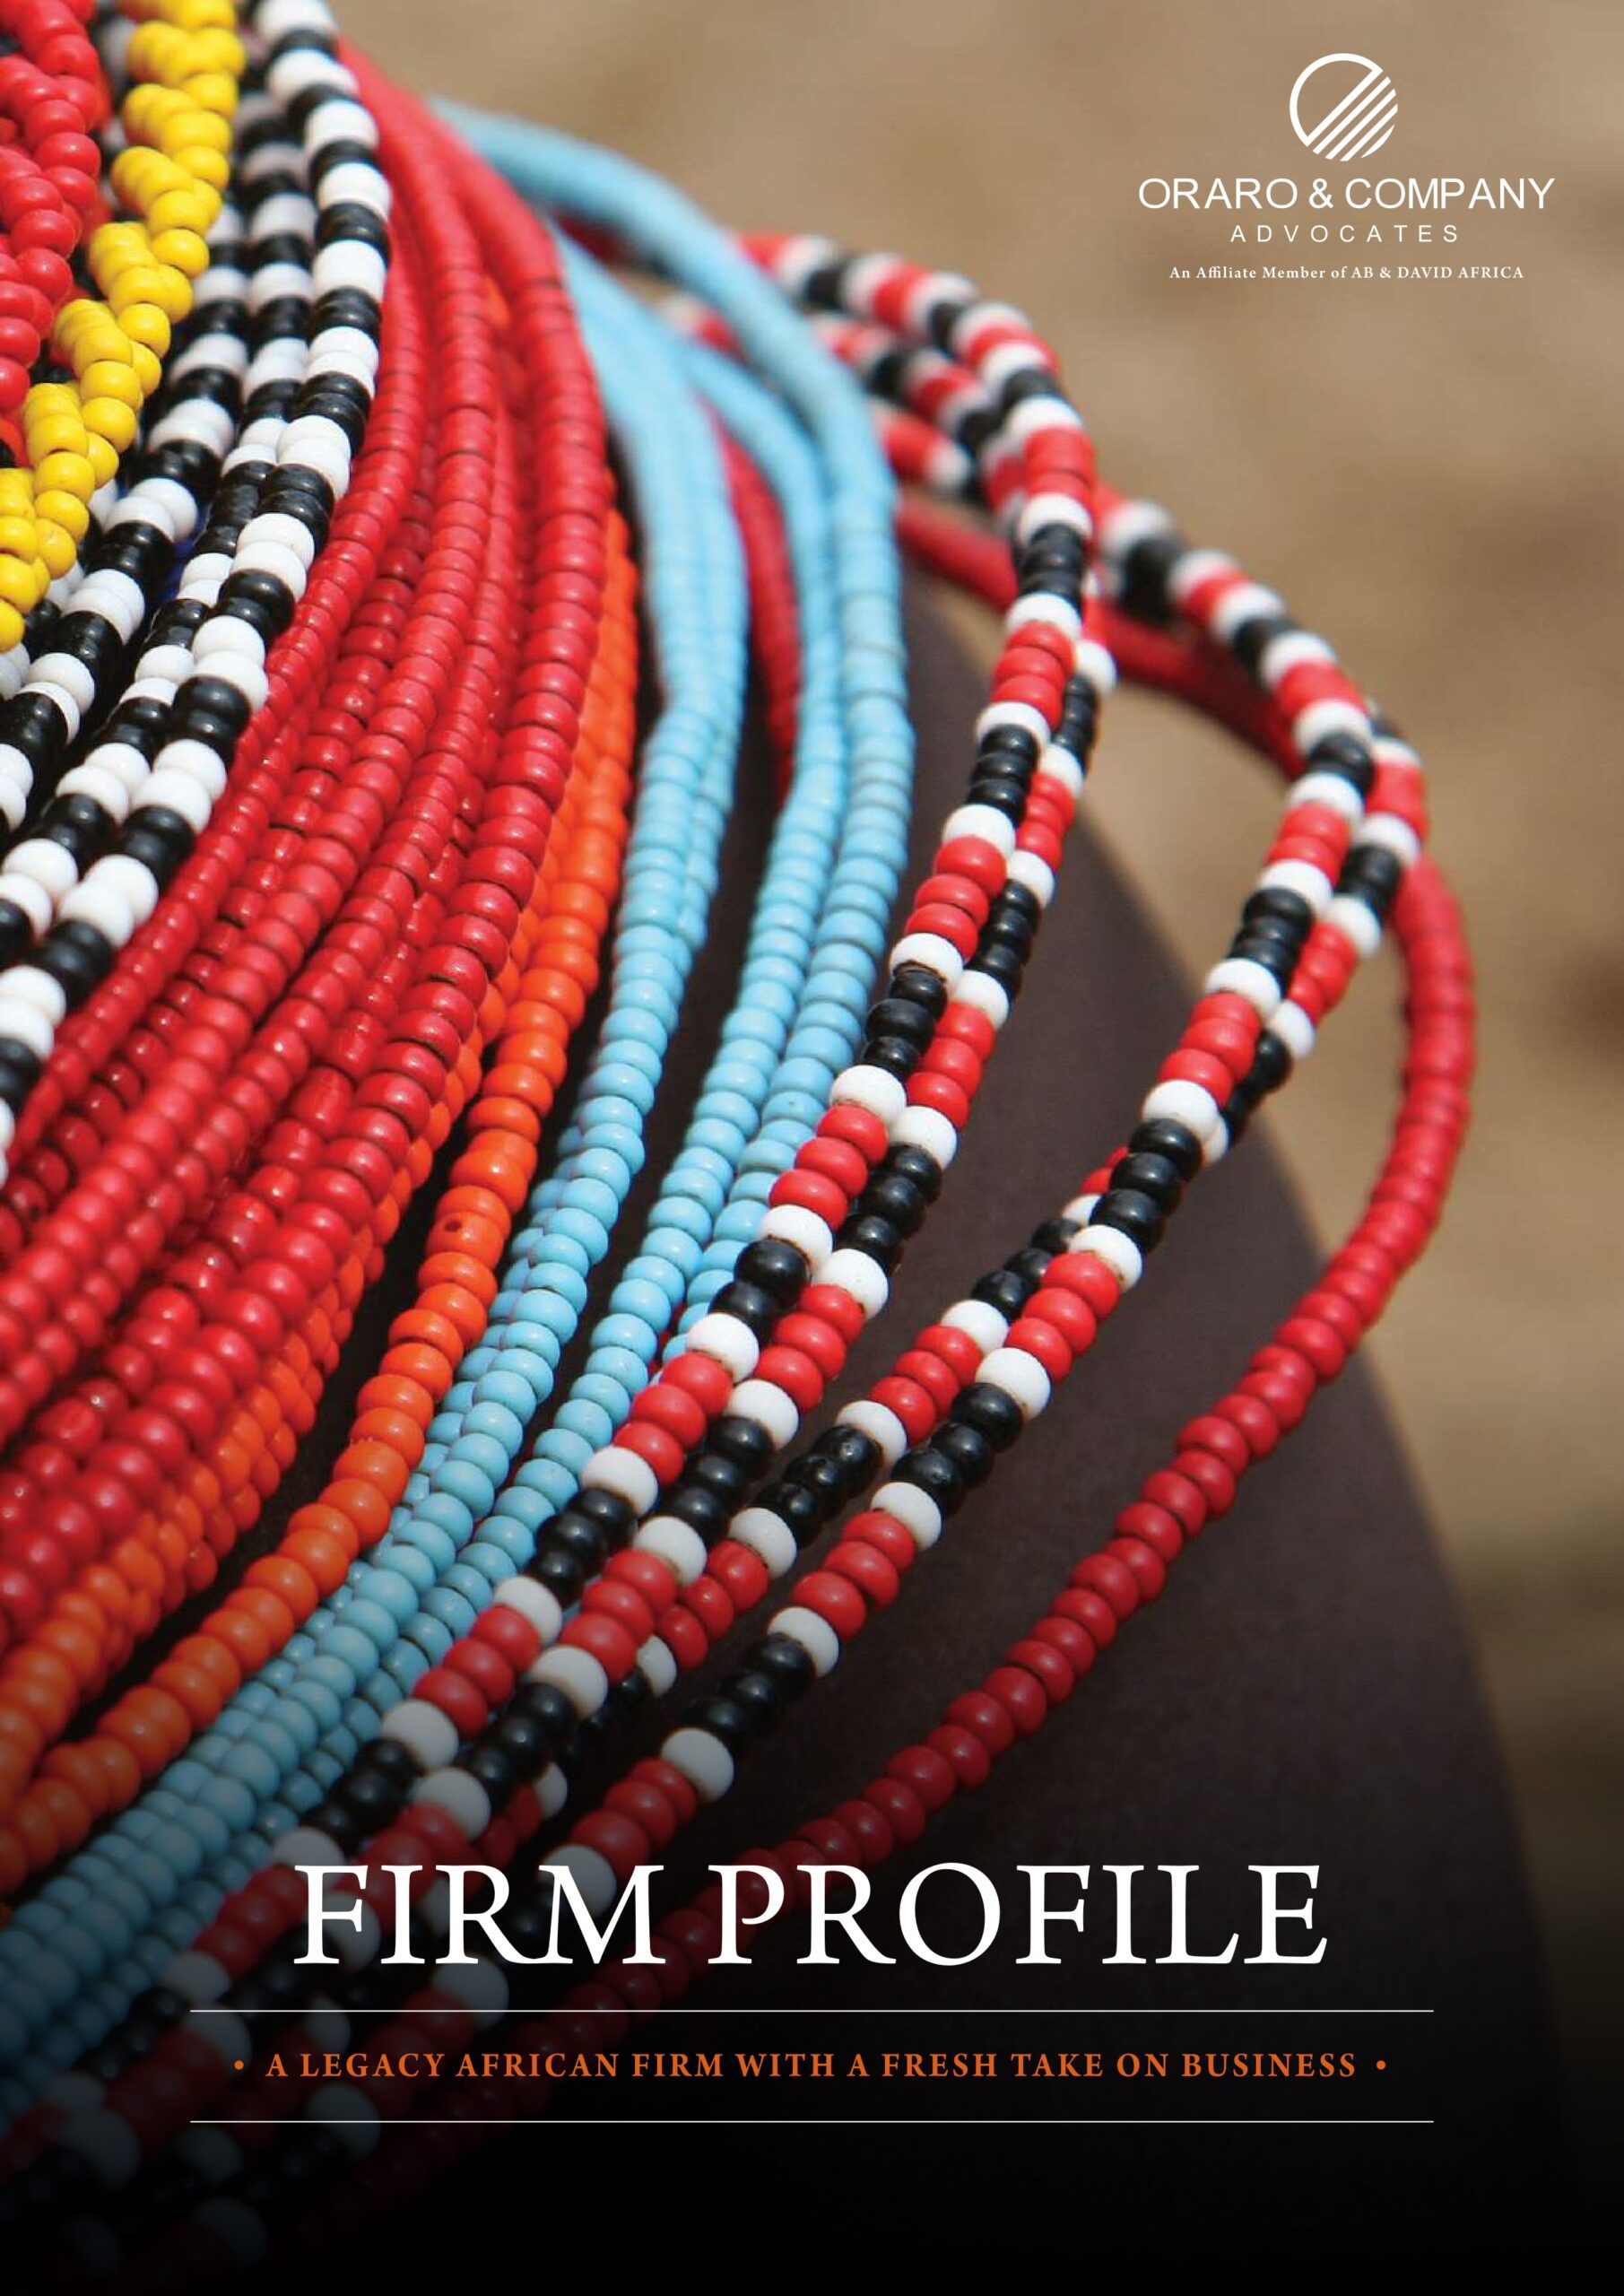 A. Firm Profile